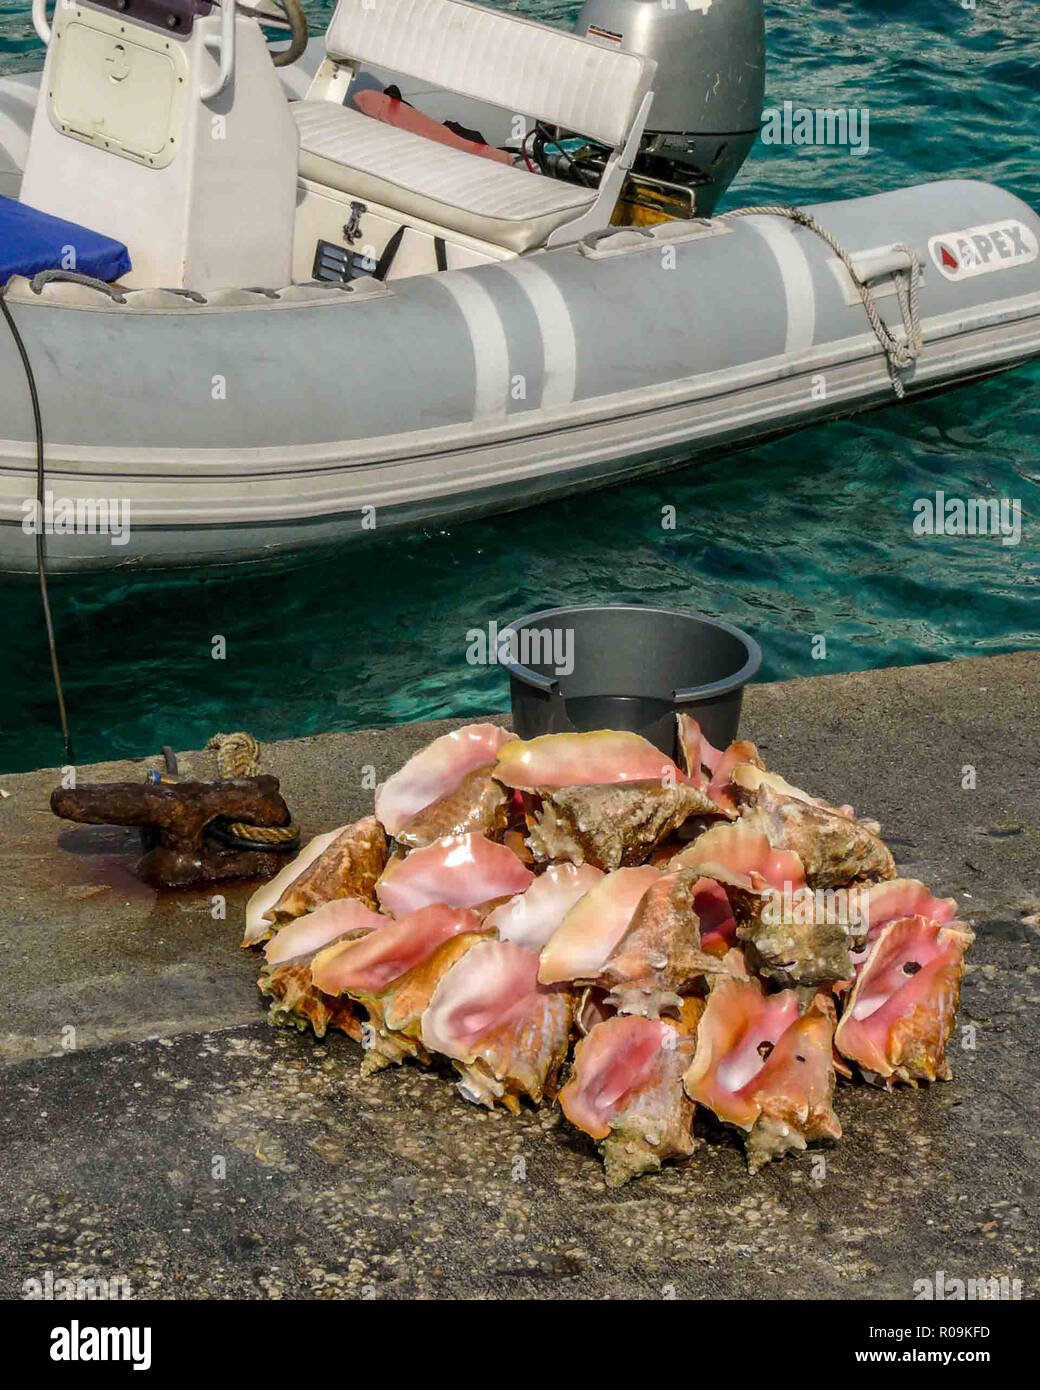 Nassau, New Providence, Bahamas. 16th Jan, 2009. Colorful conch shells for sale on the dock at the port of Nassau, capital of the Bahamas and a popular cruise-ship destination. Credit: Arnold Drapkin/ZUMA Wire/Alamy Live News Stock Photo